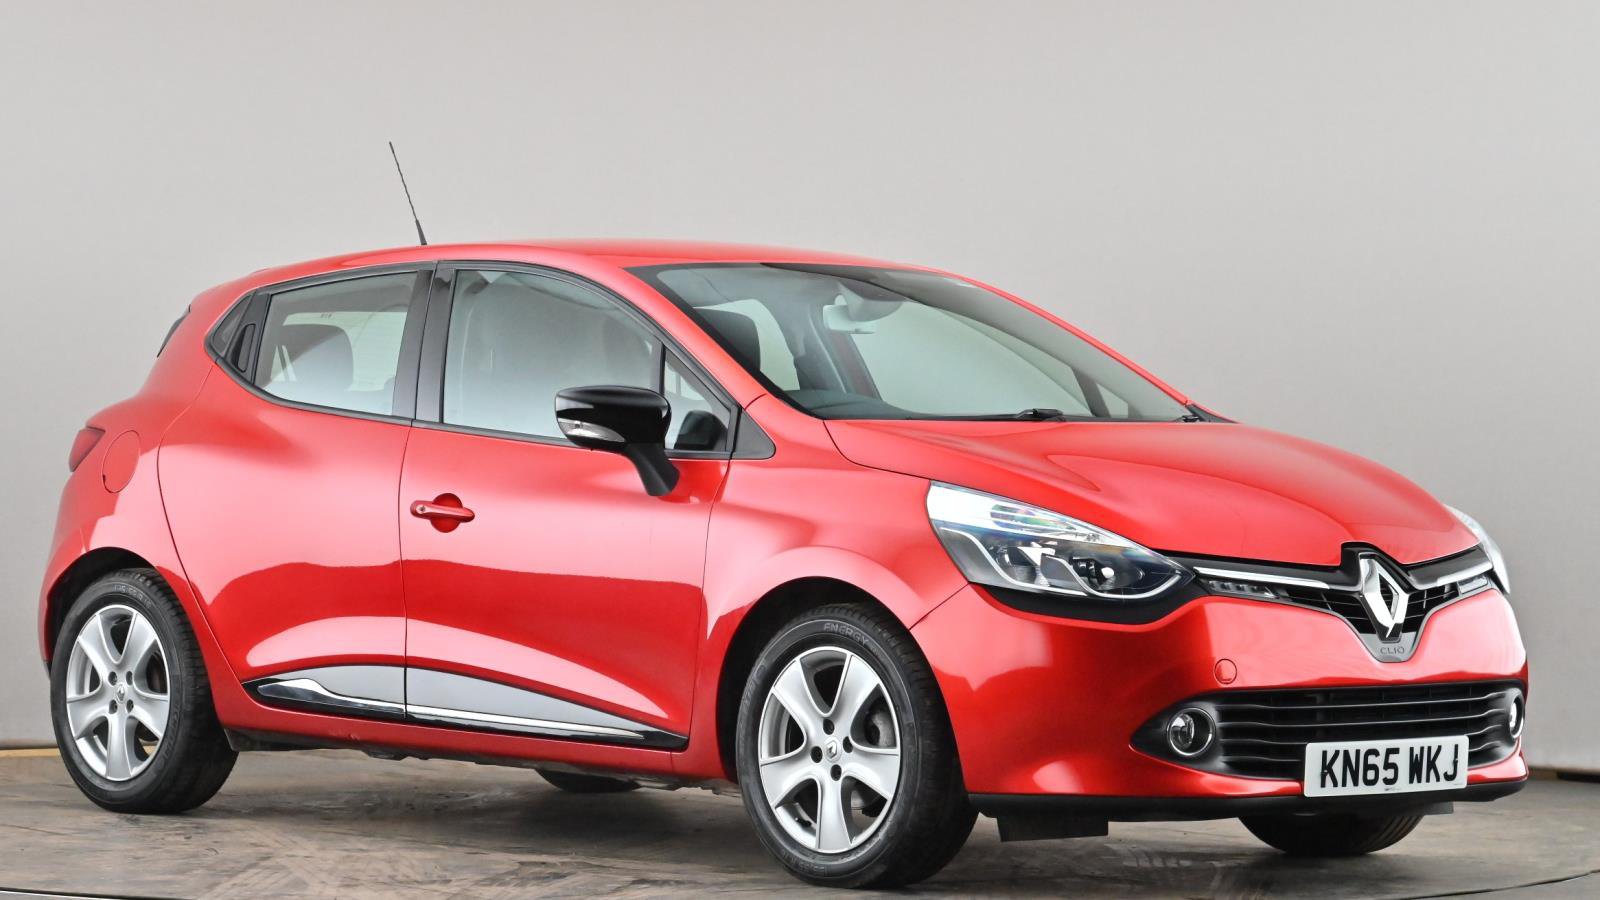 Used RENAULT CLIO 0.9 TCE 90 Dynamique Nav 5dr Red